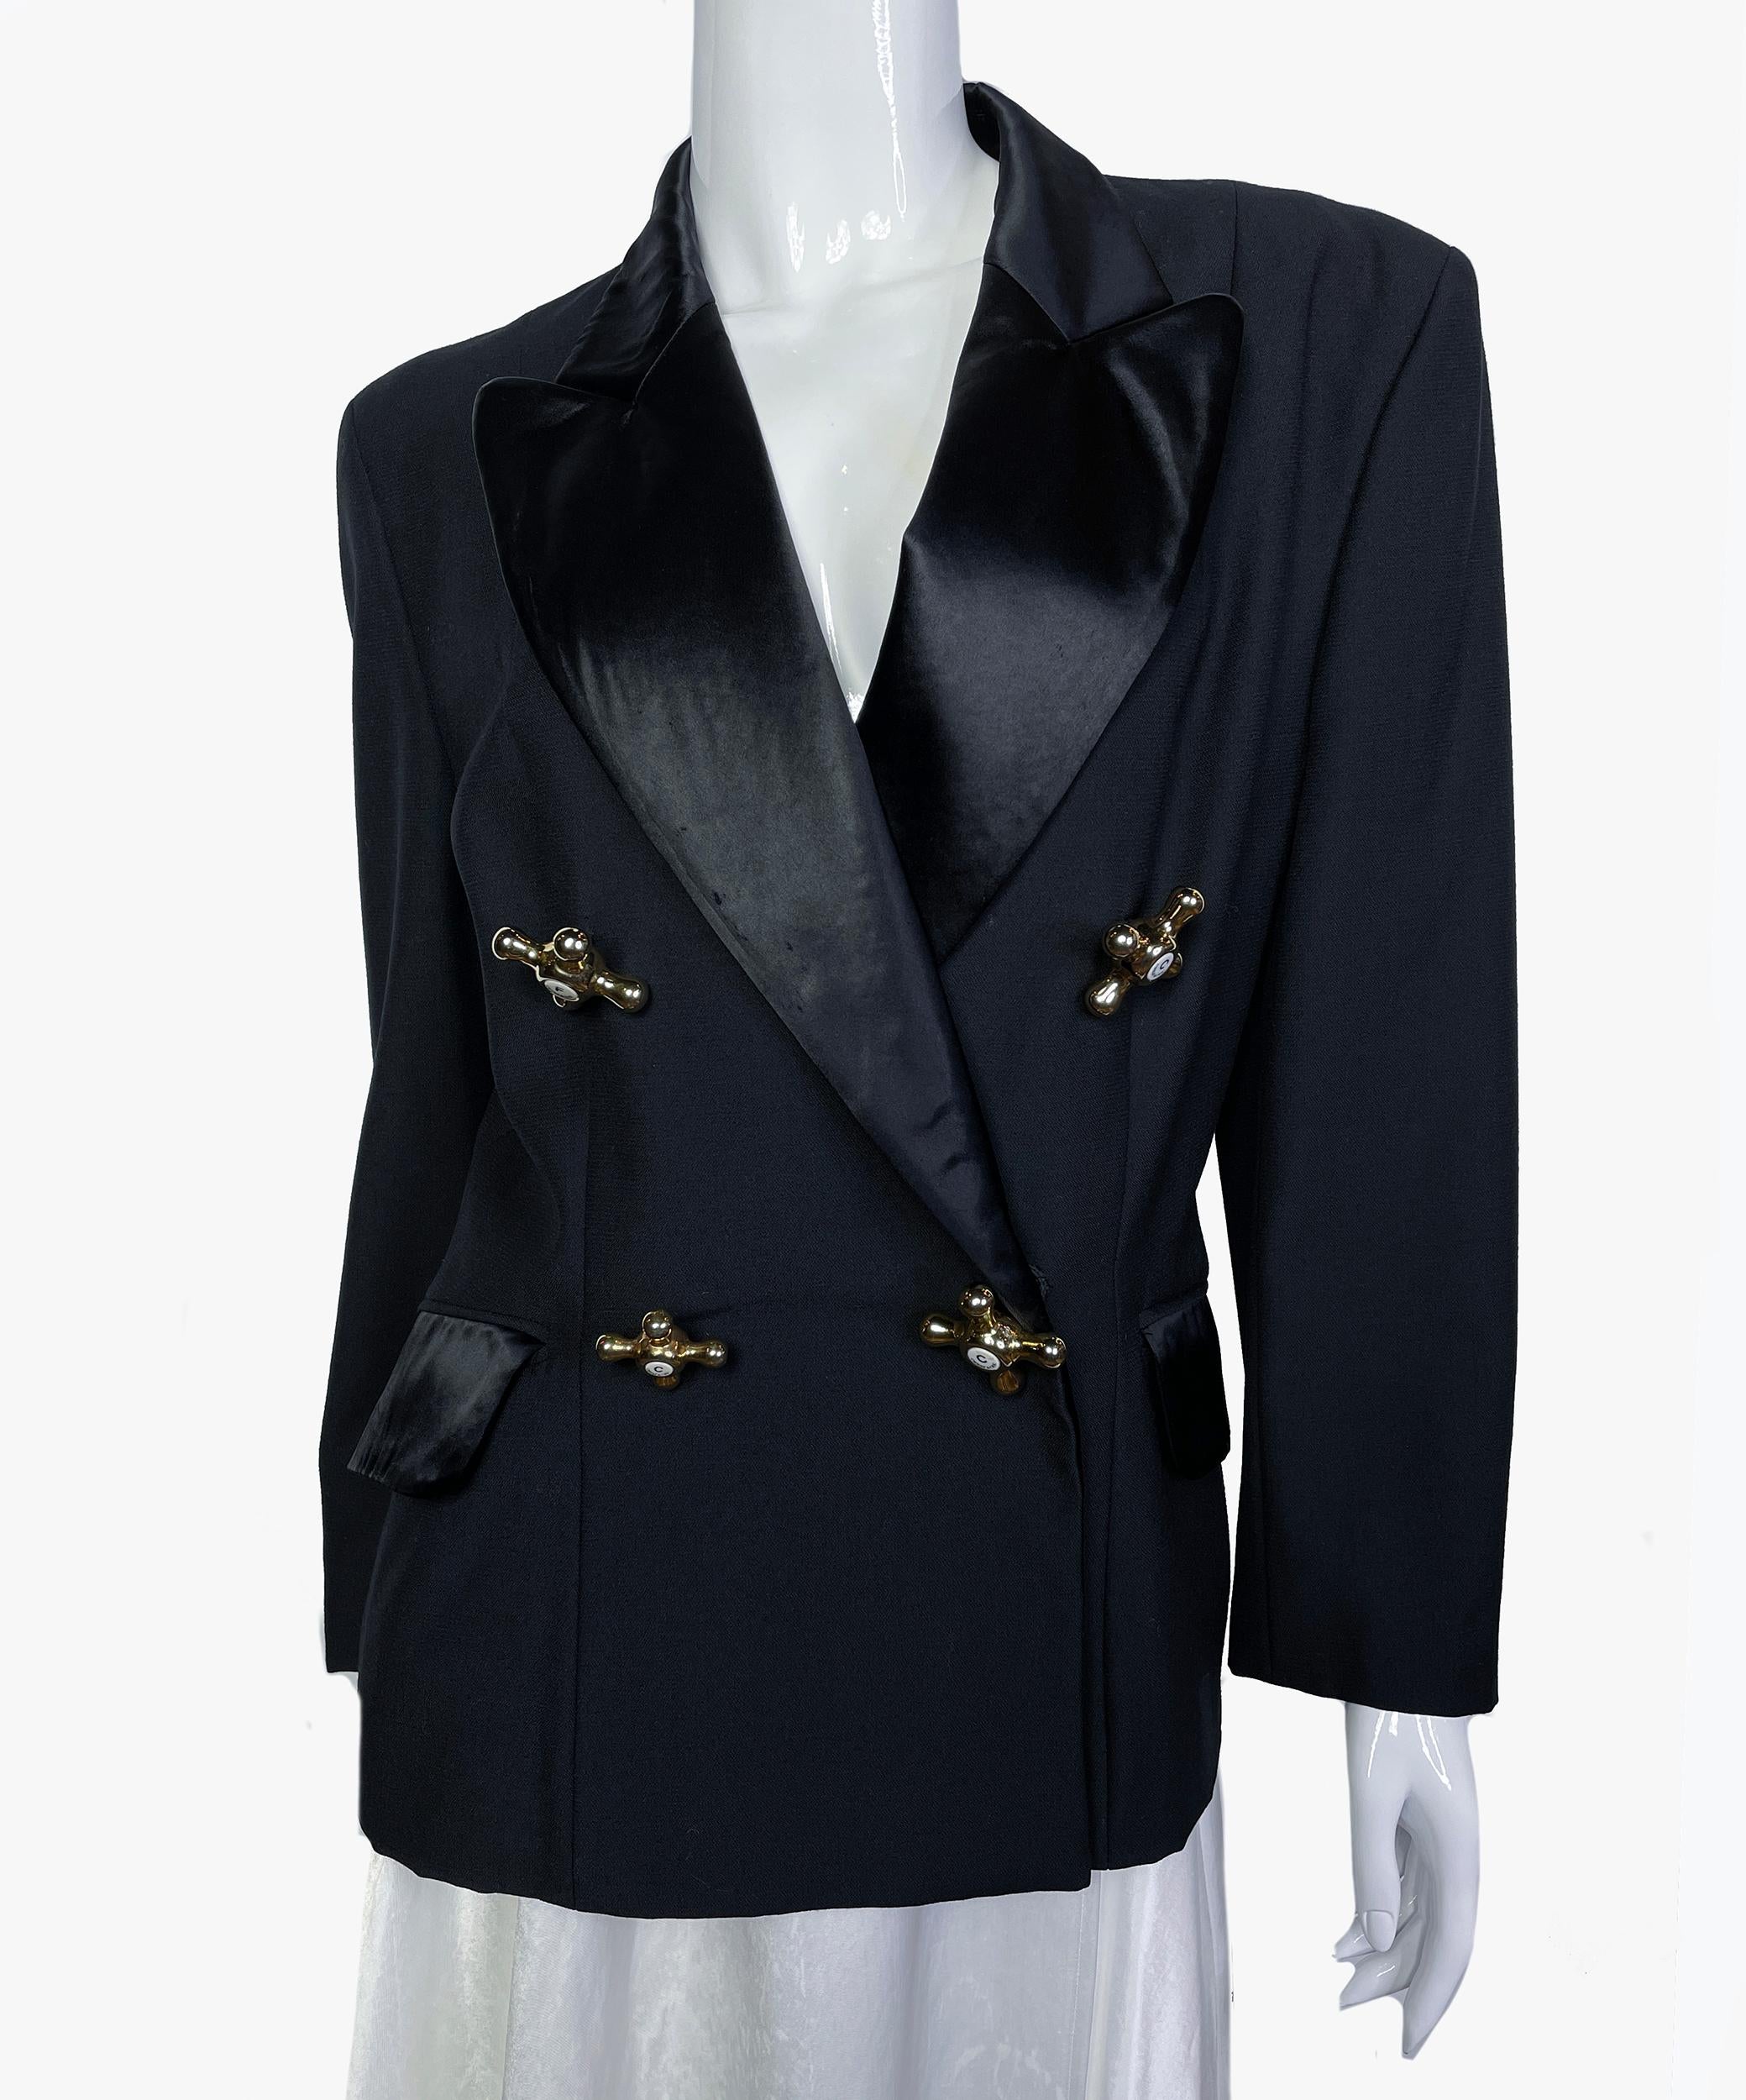 This iconic vintage Moschino jacket is crafted from a black virgin wool fabric with a silky/satiny collar and flap pockets.
The jacket features strong padded shoulders and a double-breasted closure with the iconic gold-tone faucet buttons.
Faucet